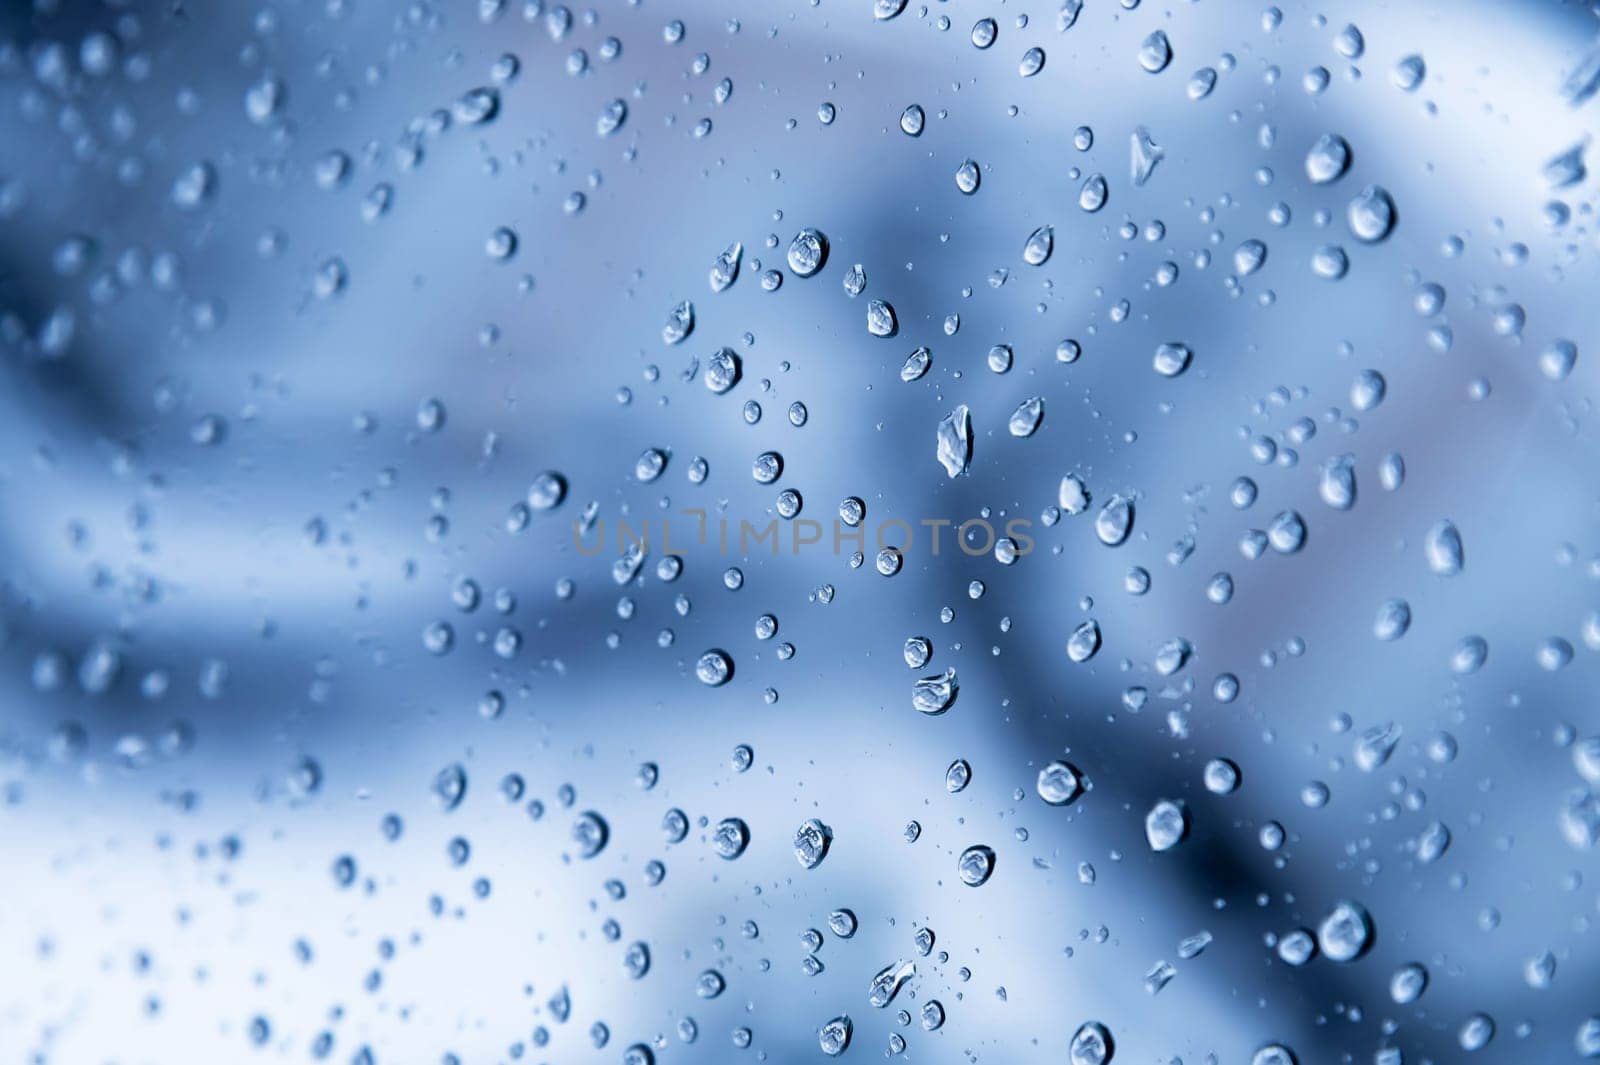 natural water drops on the window glass. blue background with rain on the window, close-up by yanik88